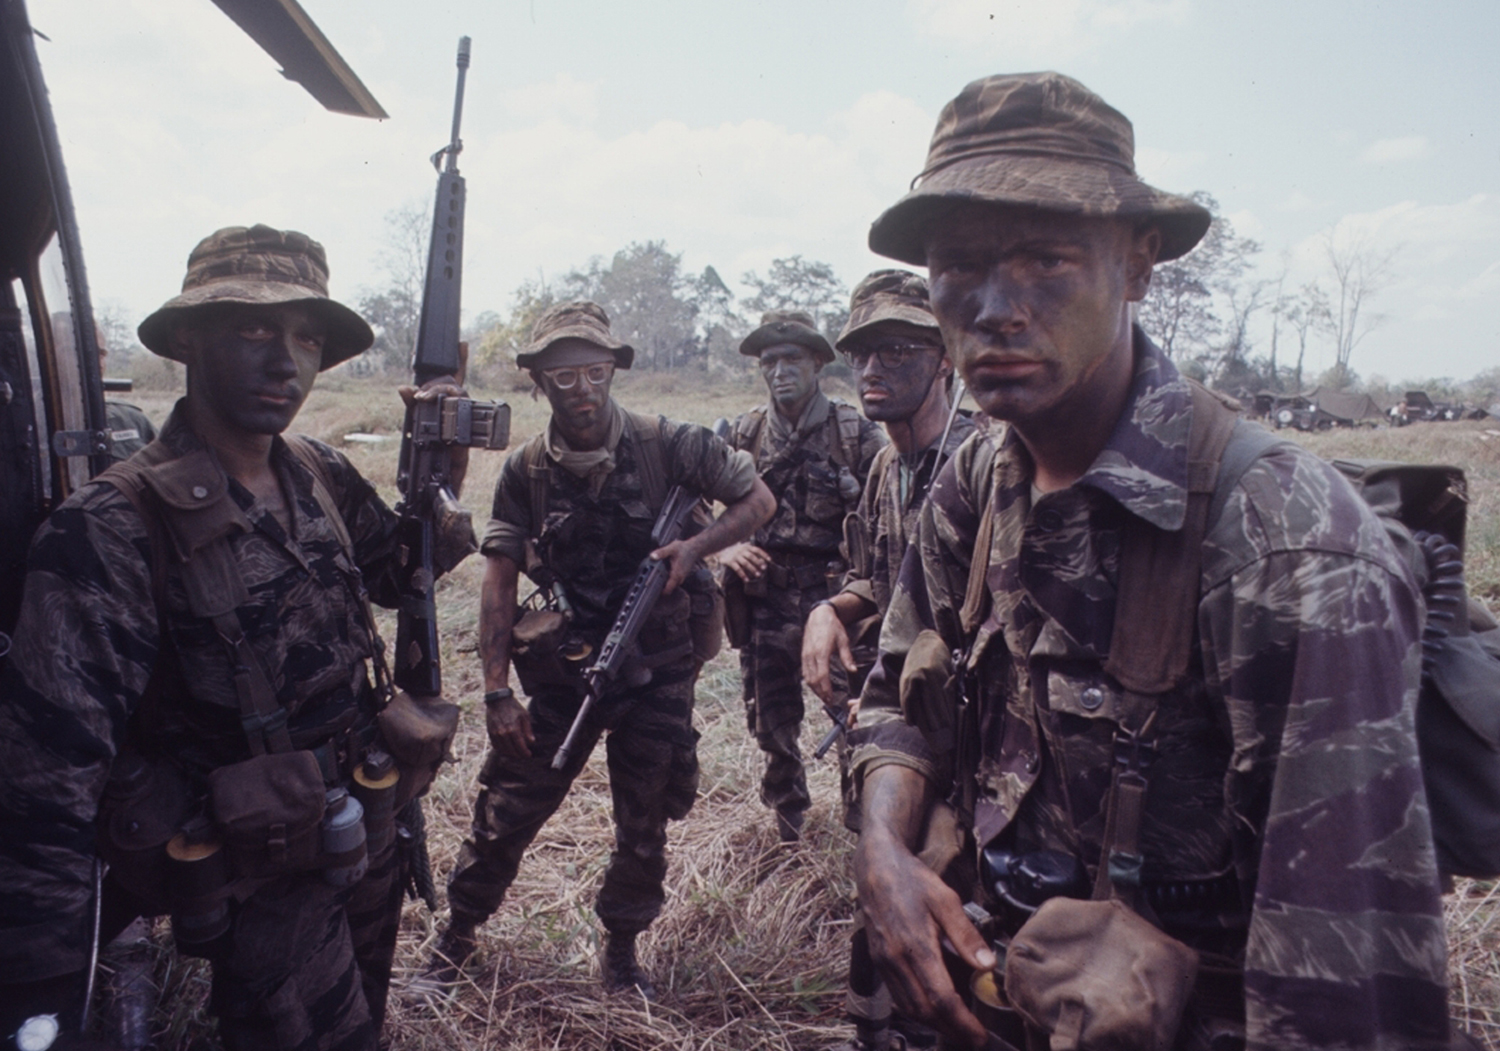 American soldiers of 2nd Battalion, 503rd Airborne Infantry, 173rd Airborne Division gear up for a long range patrol during Operation Junction City, a massive 1967 search and destroy operation in Vietnam.